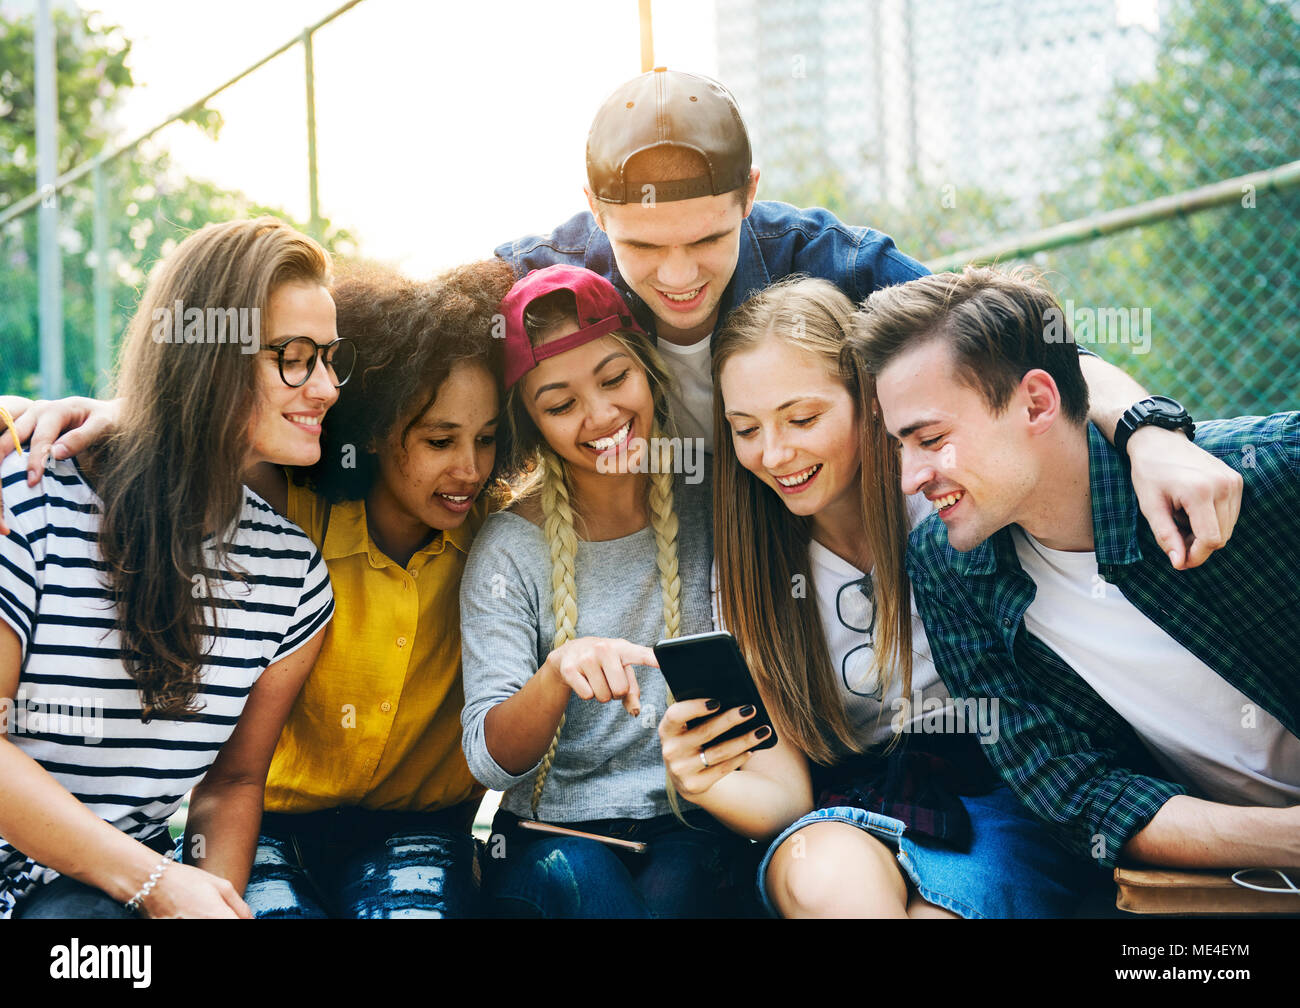 Friends in the park looking using smartphones millennial and youth culture concept Stock Photo